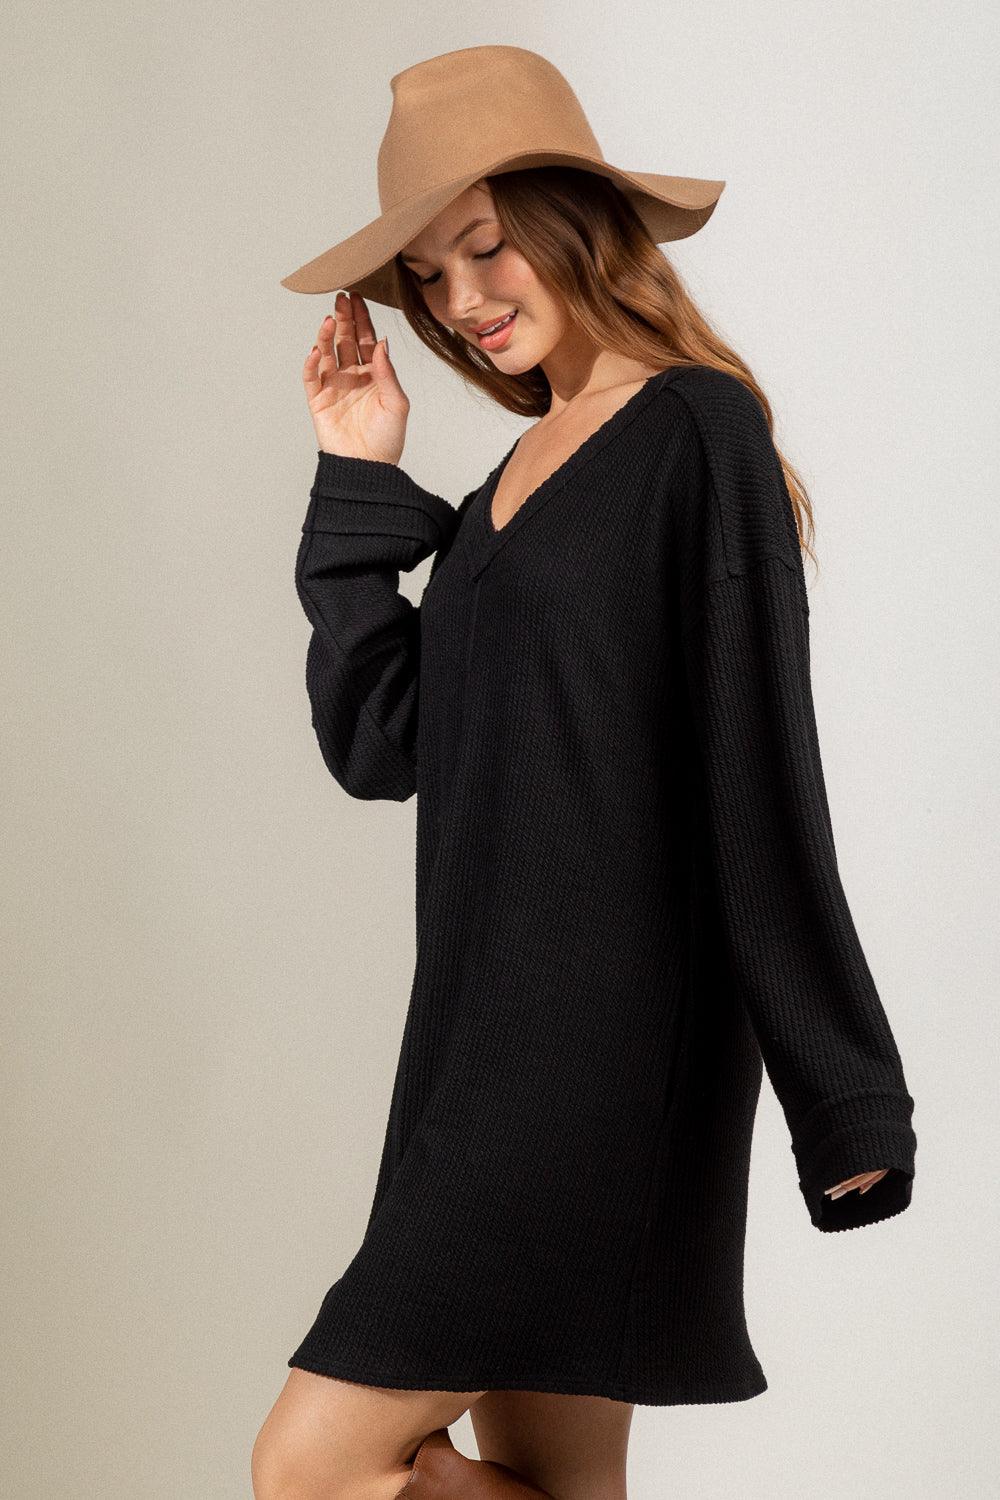 Black Textured Knit Dress with Pockets - Strawberry Moon Boutique